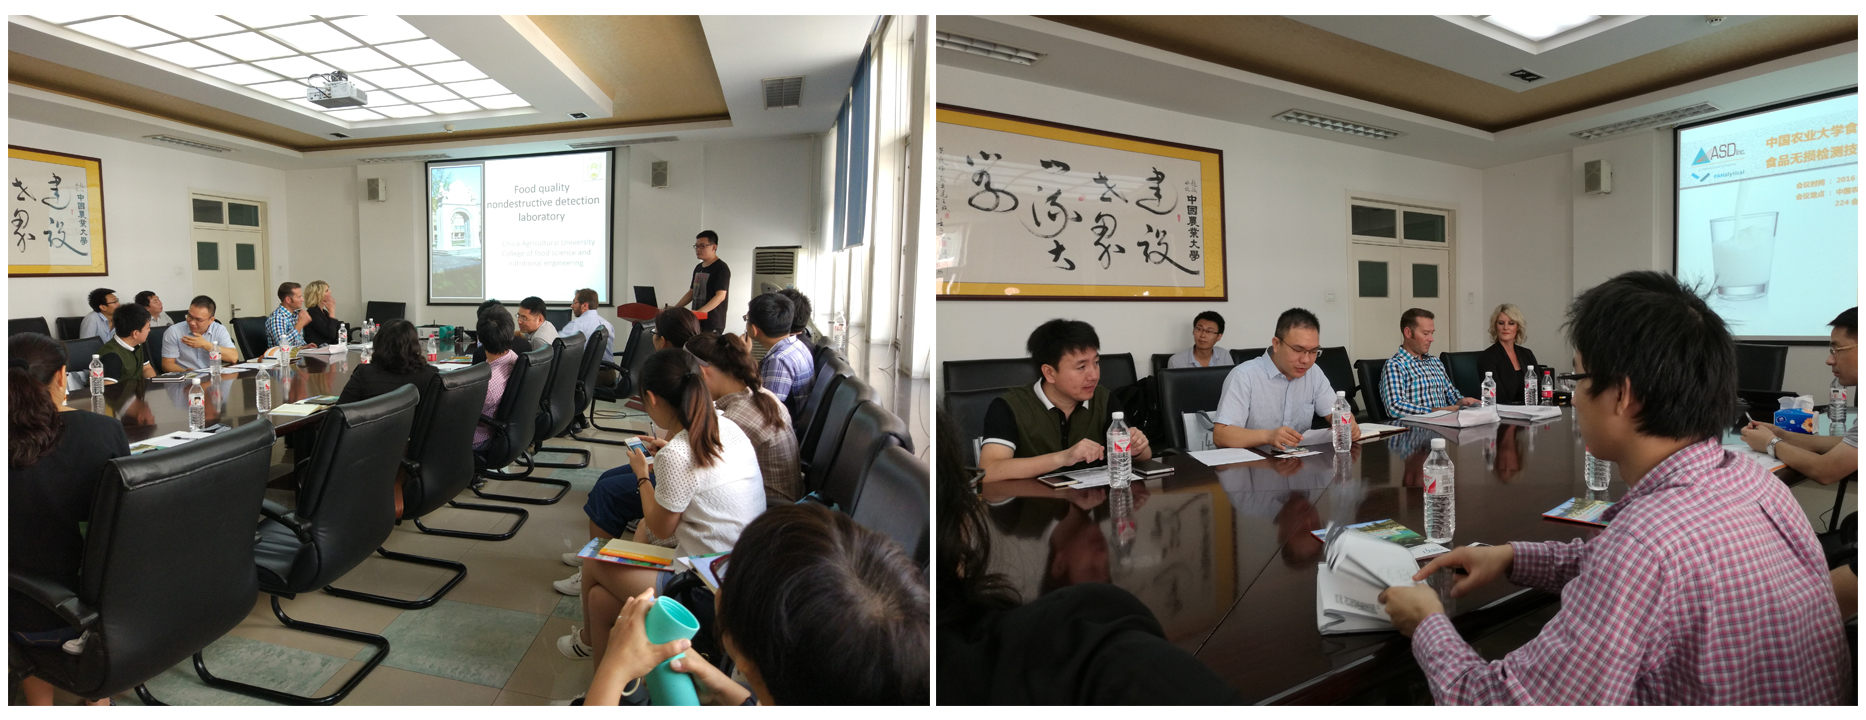 Technical Exchange Meeting on Nondestructive Examination of Food